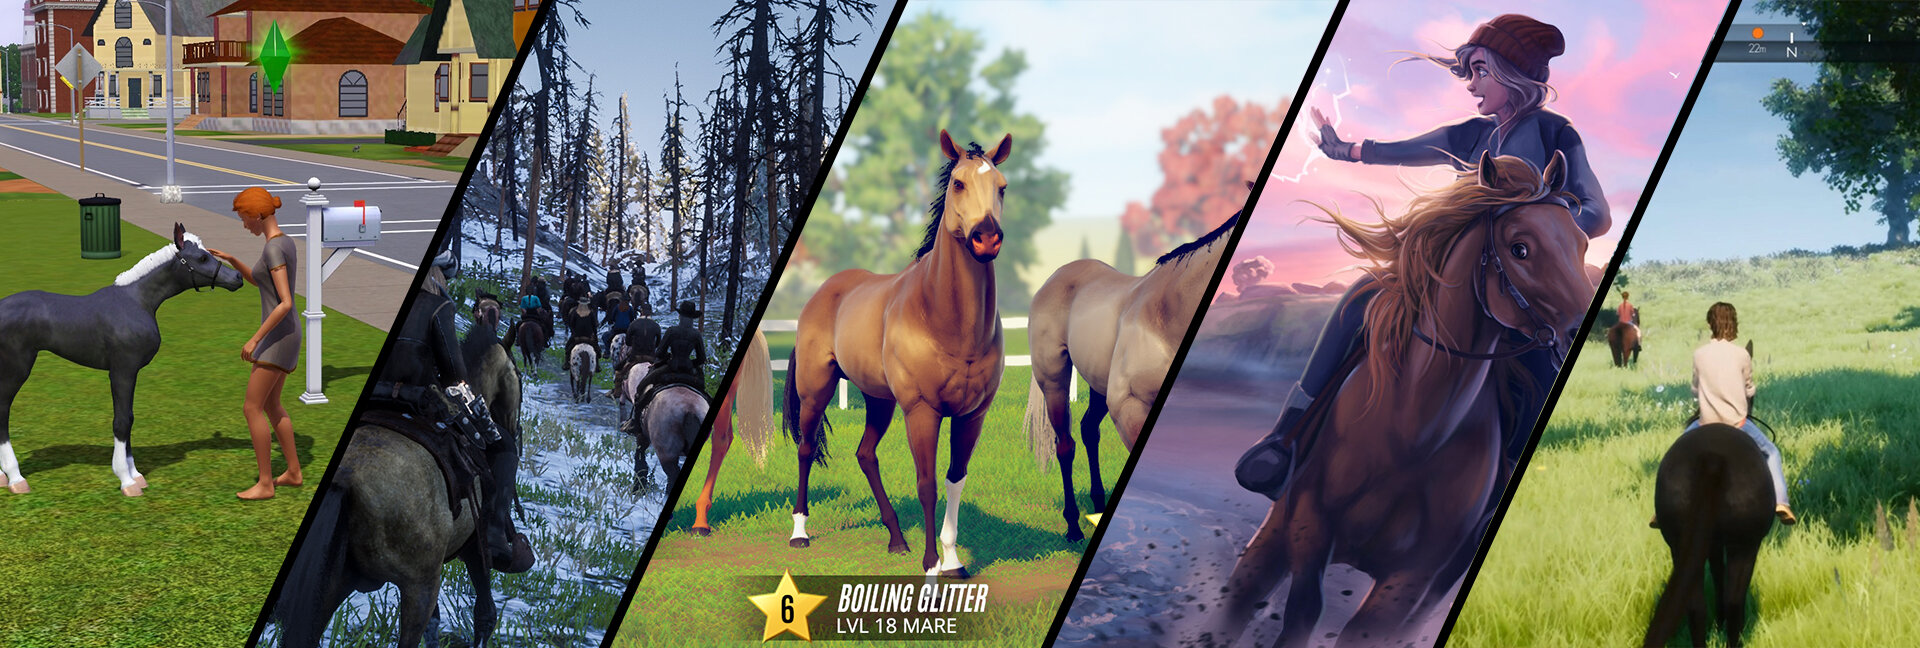 The Best Horse Games to play on PC and Console in 2020 (Original) — The  Mane Quest